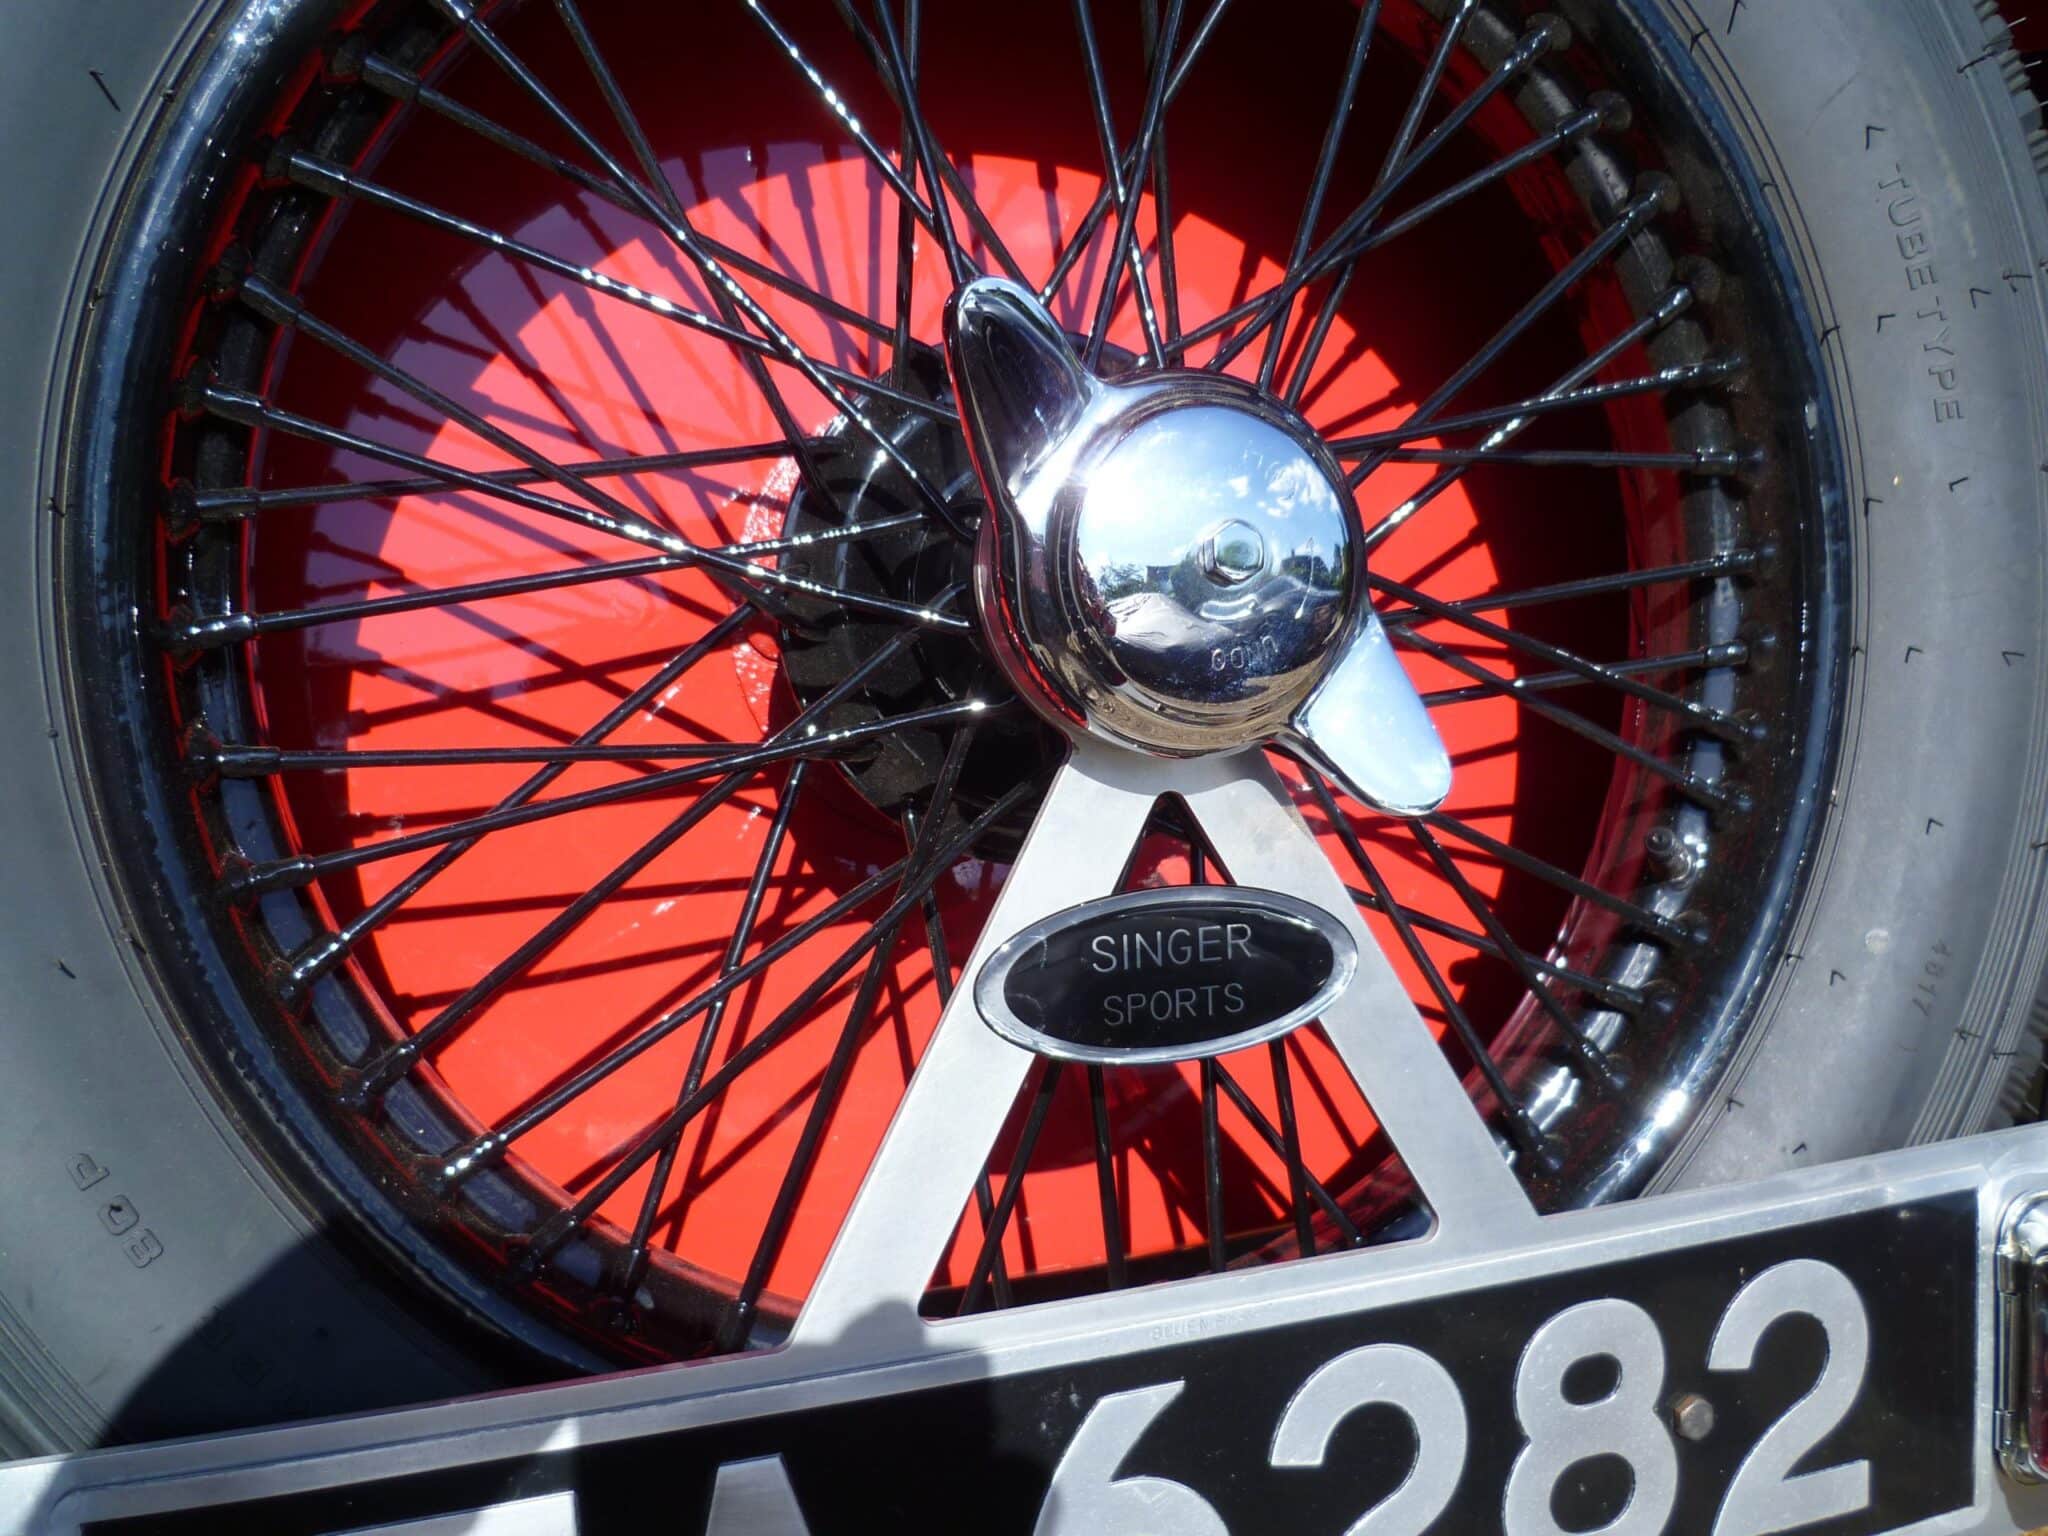 Weather-Resistant Alloy Wheel Emblems for Motorcycle Manufacturers